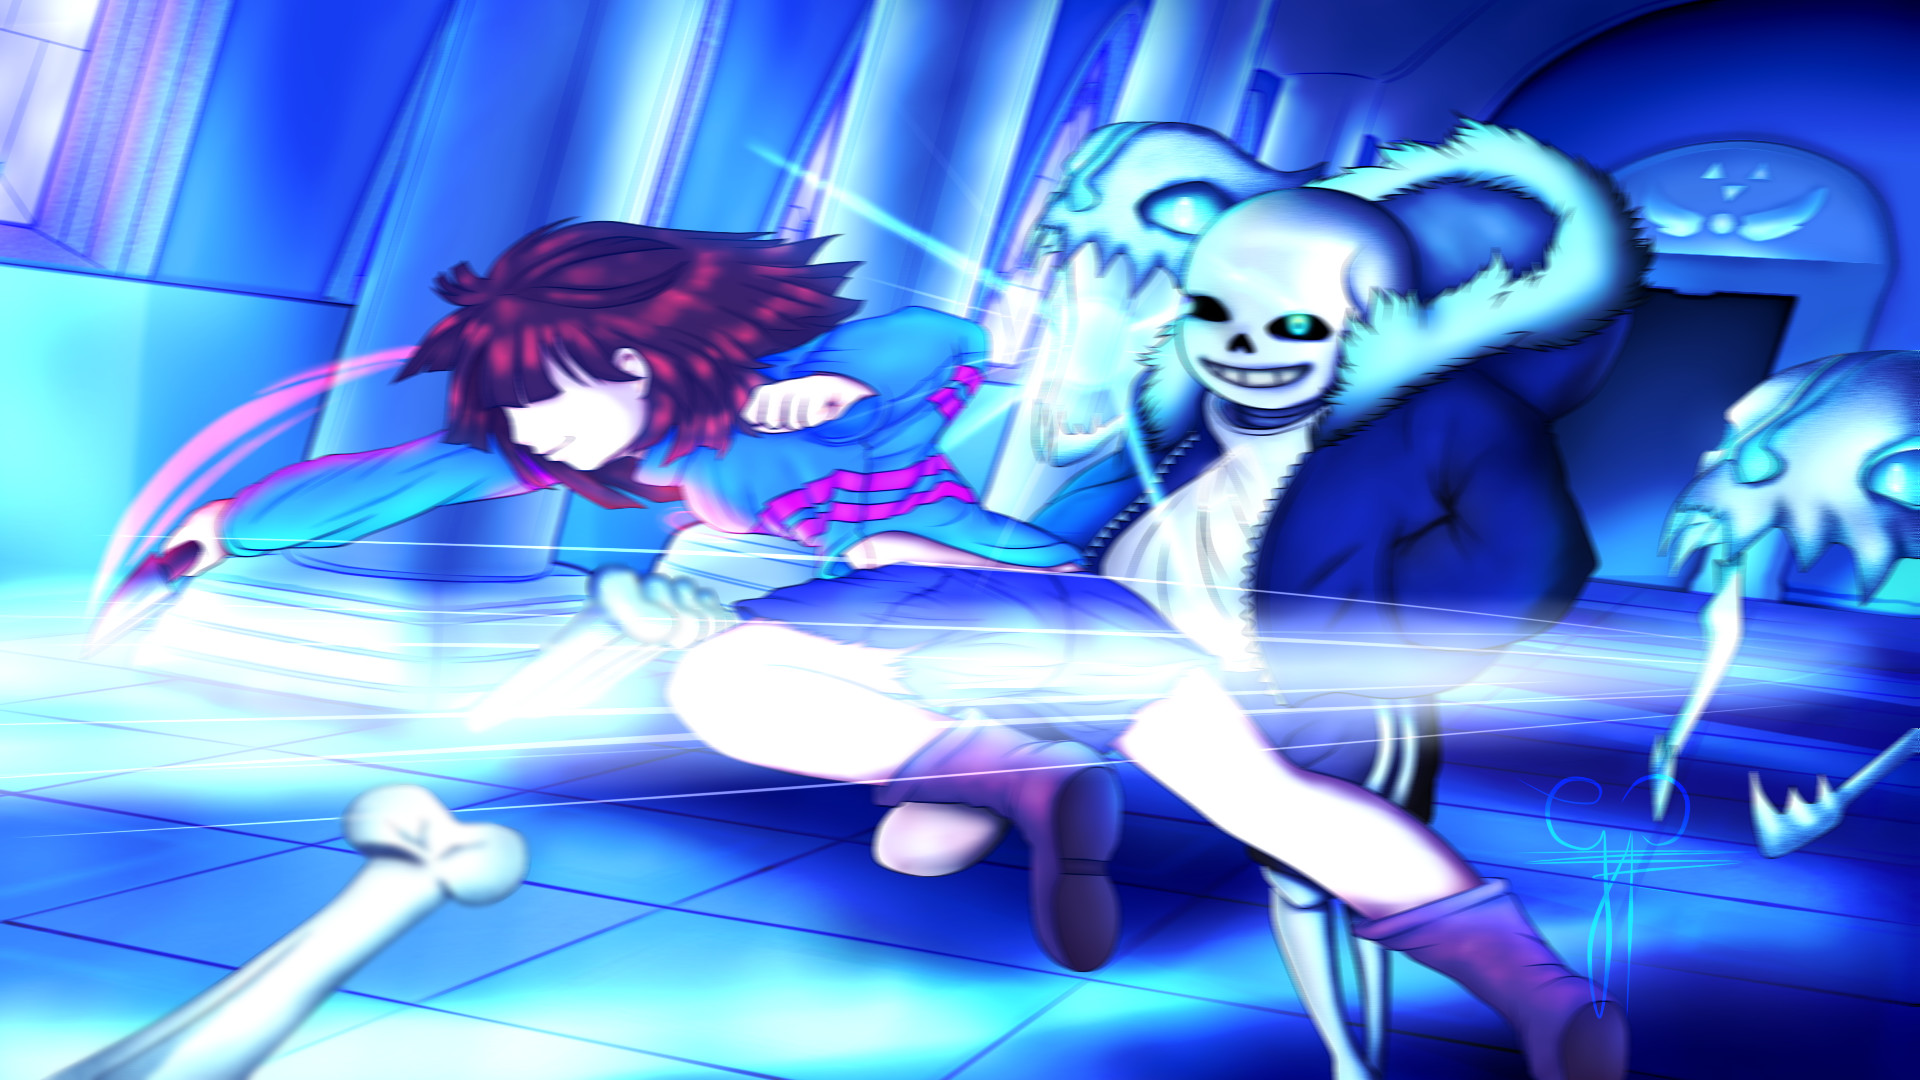 1920x1080 Undertale - Genocide: Sans vs Frisk and Judgment Hall by: GabrielP